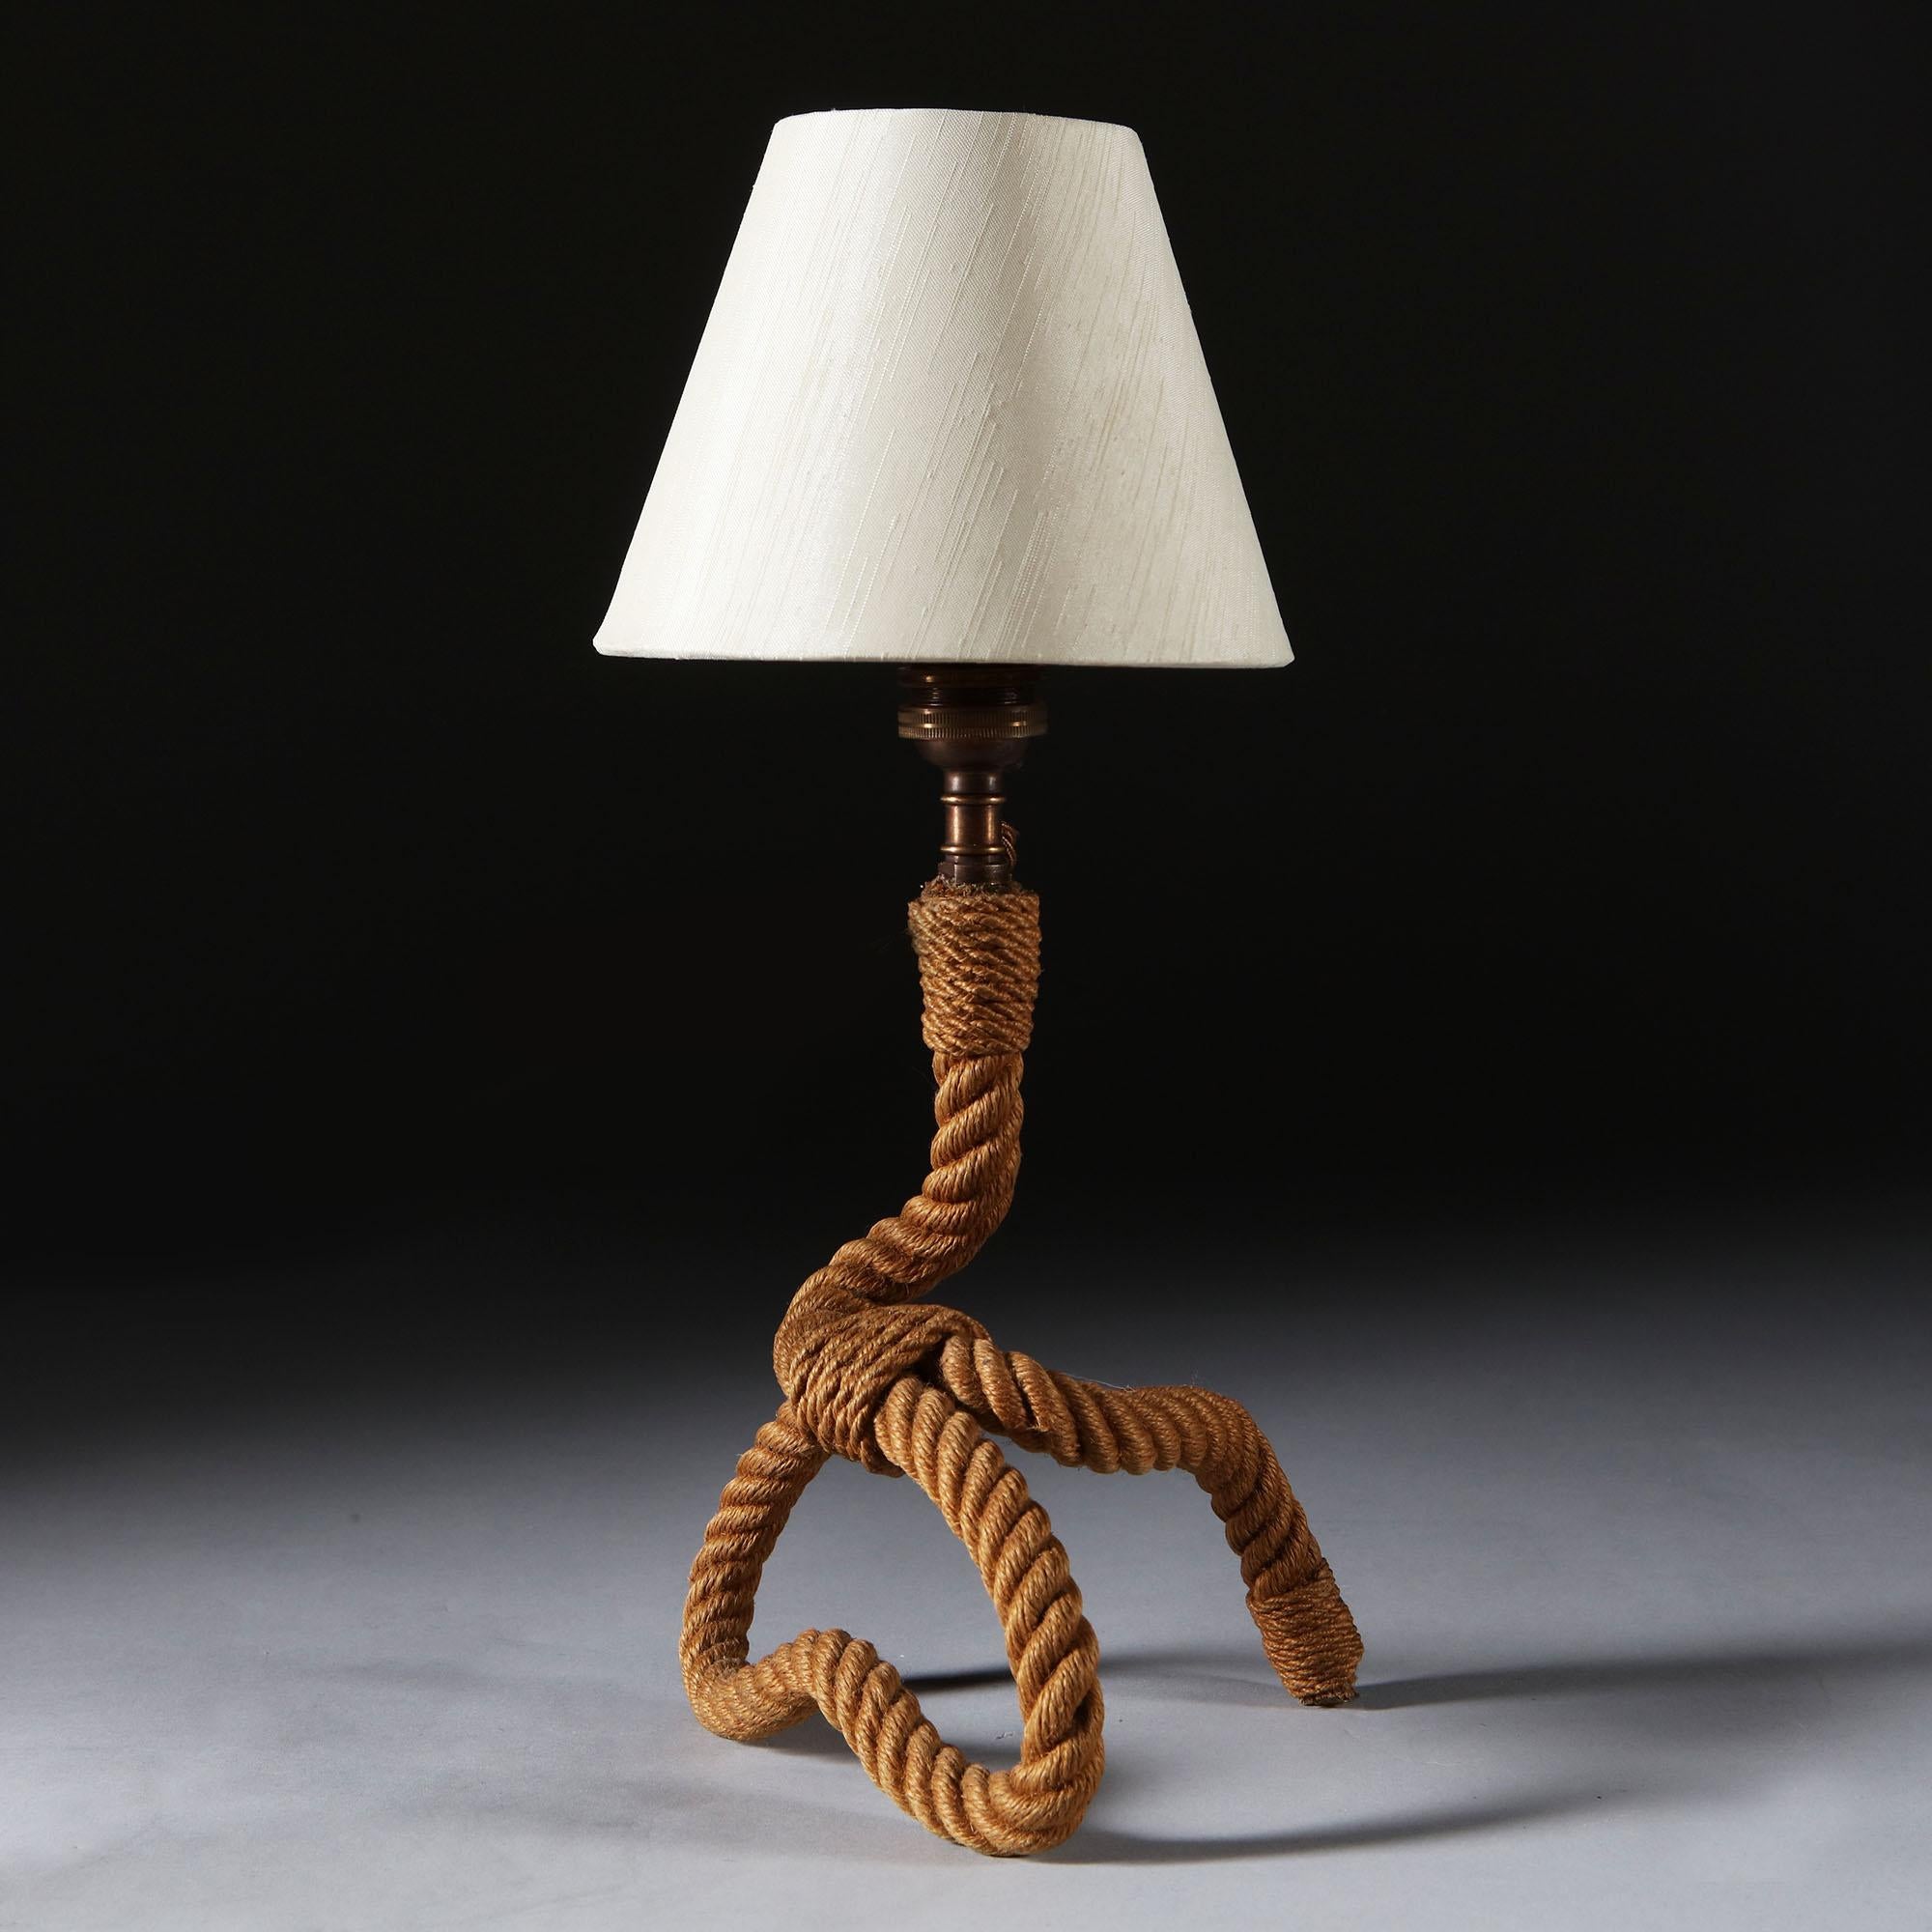 A mid-20th century French sculptural desk lamp in the form of a twisted rope, attributed to Adrien Audoux and Frida Minet. With custom shade.

Designers Adrien Audoux and Frida Minet were working together in mid-20th century France, designing and